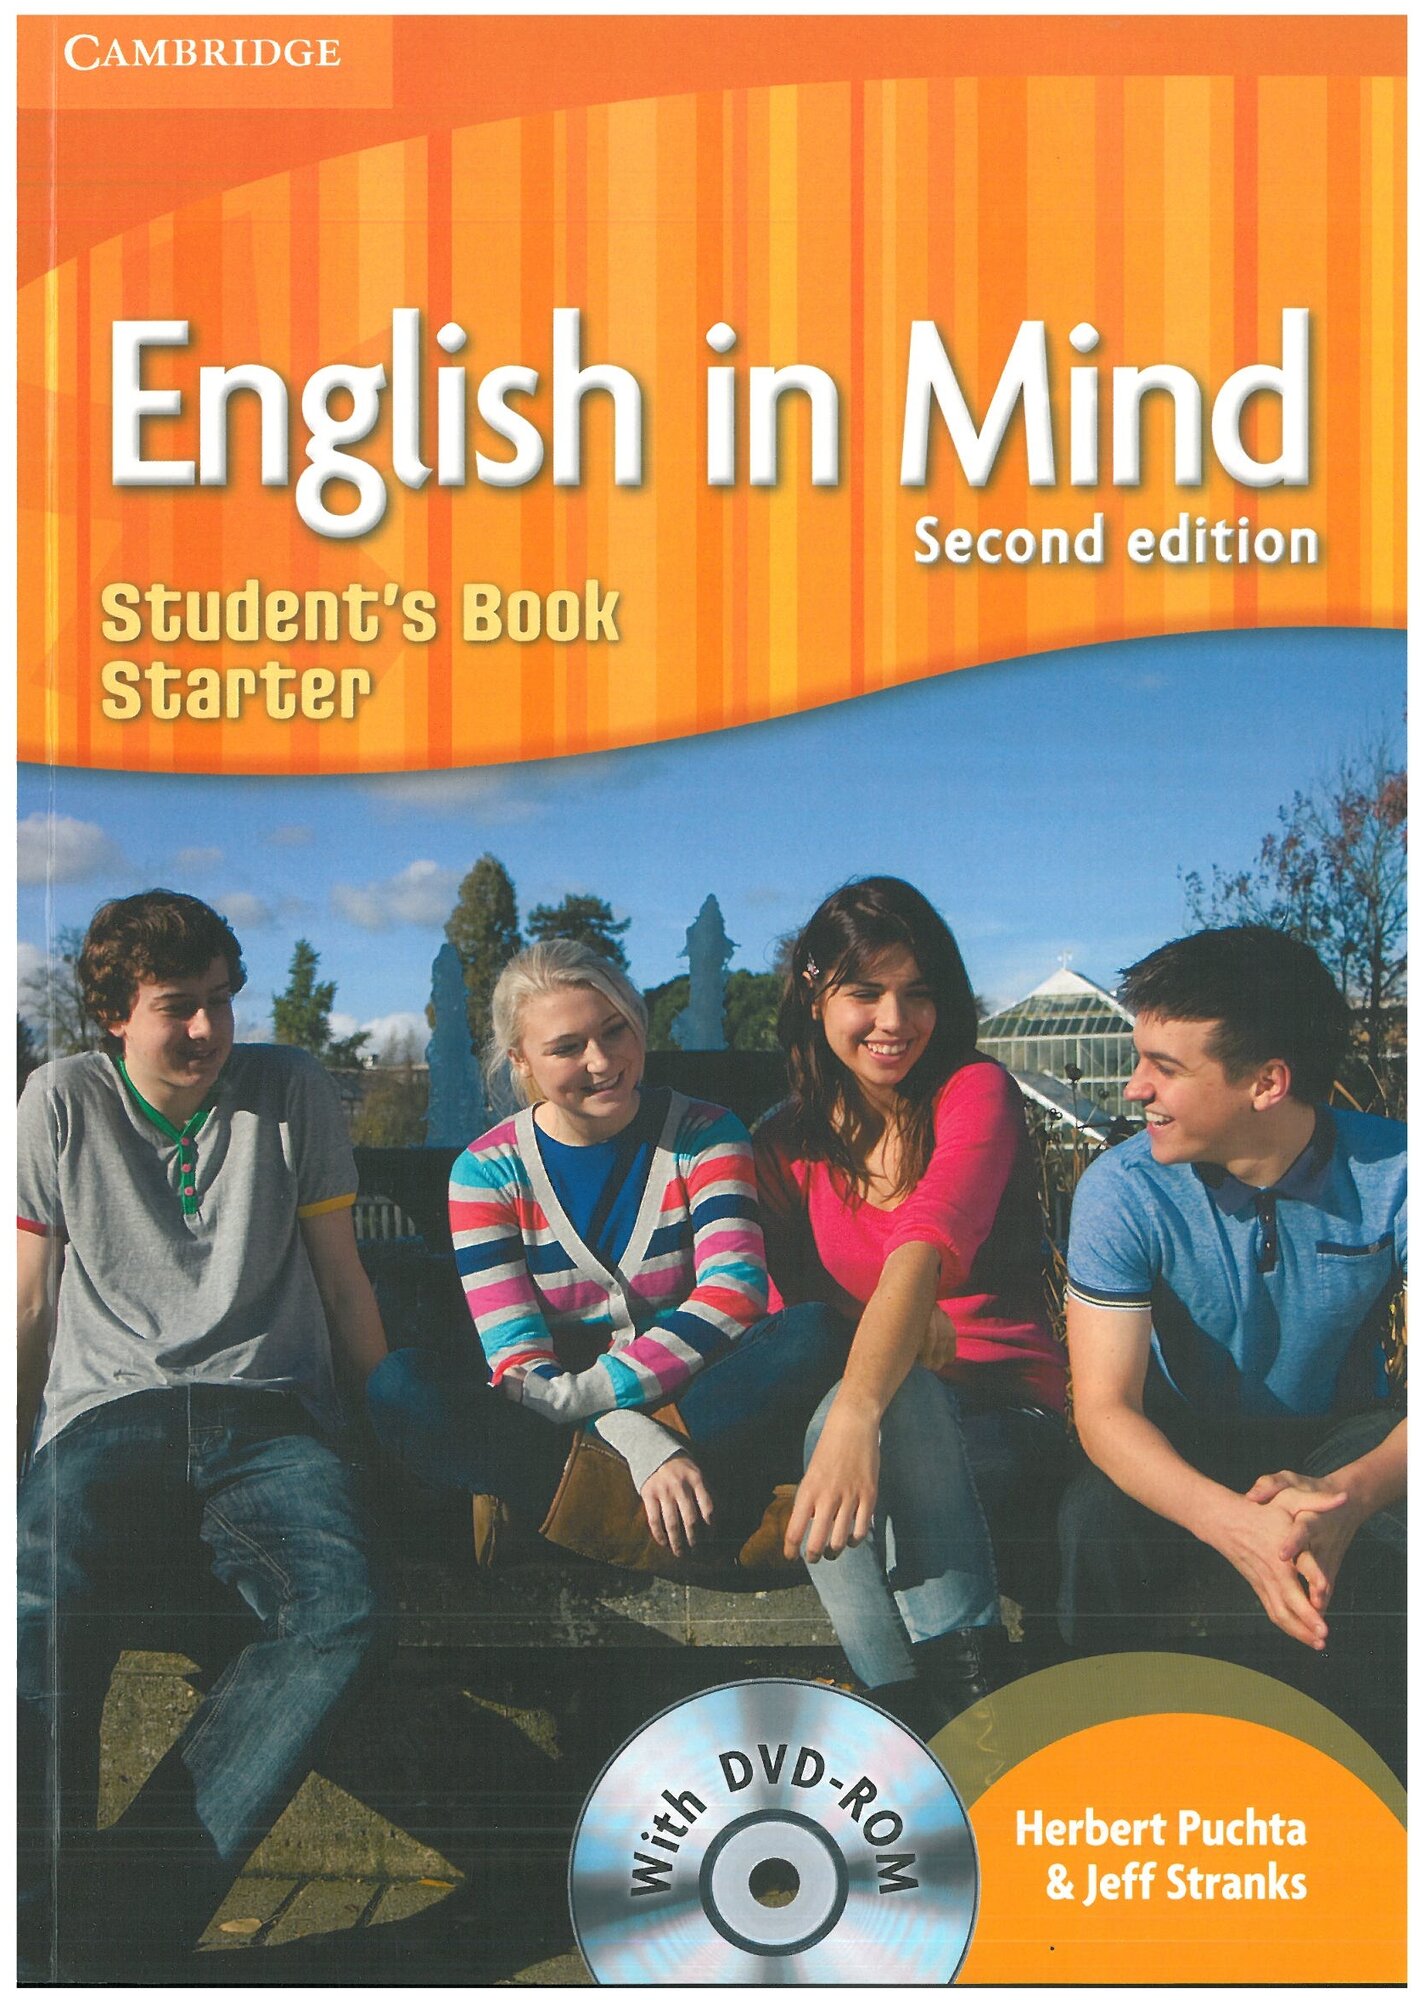 English in Mind (Second Edition) Starter Student's Book with DVD-ROM